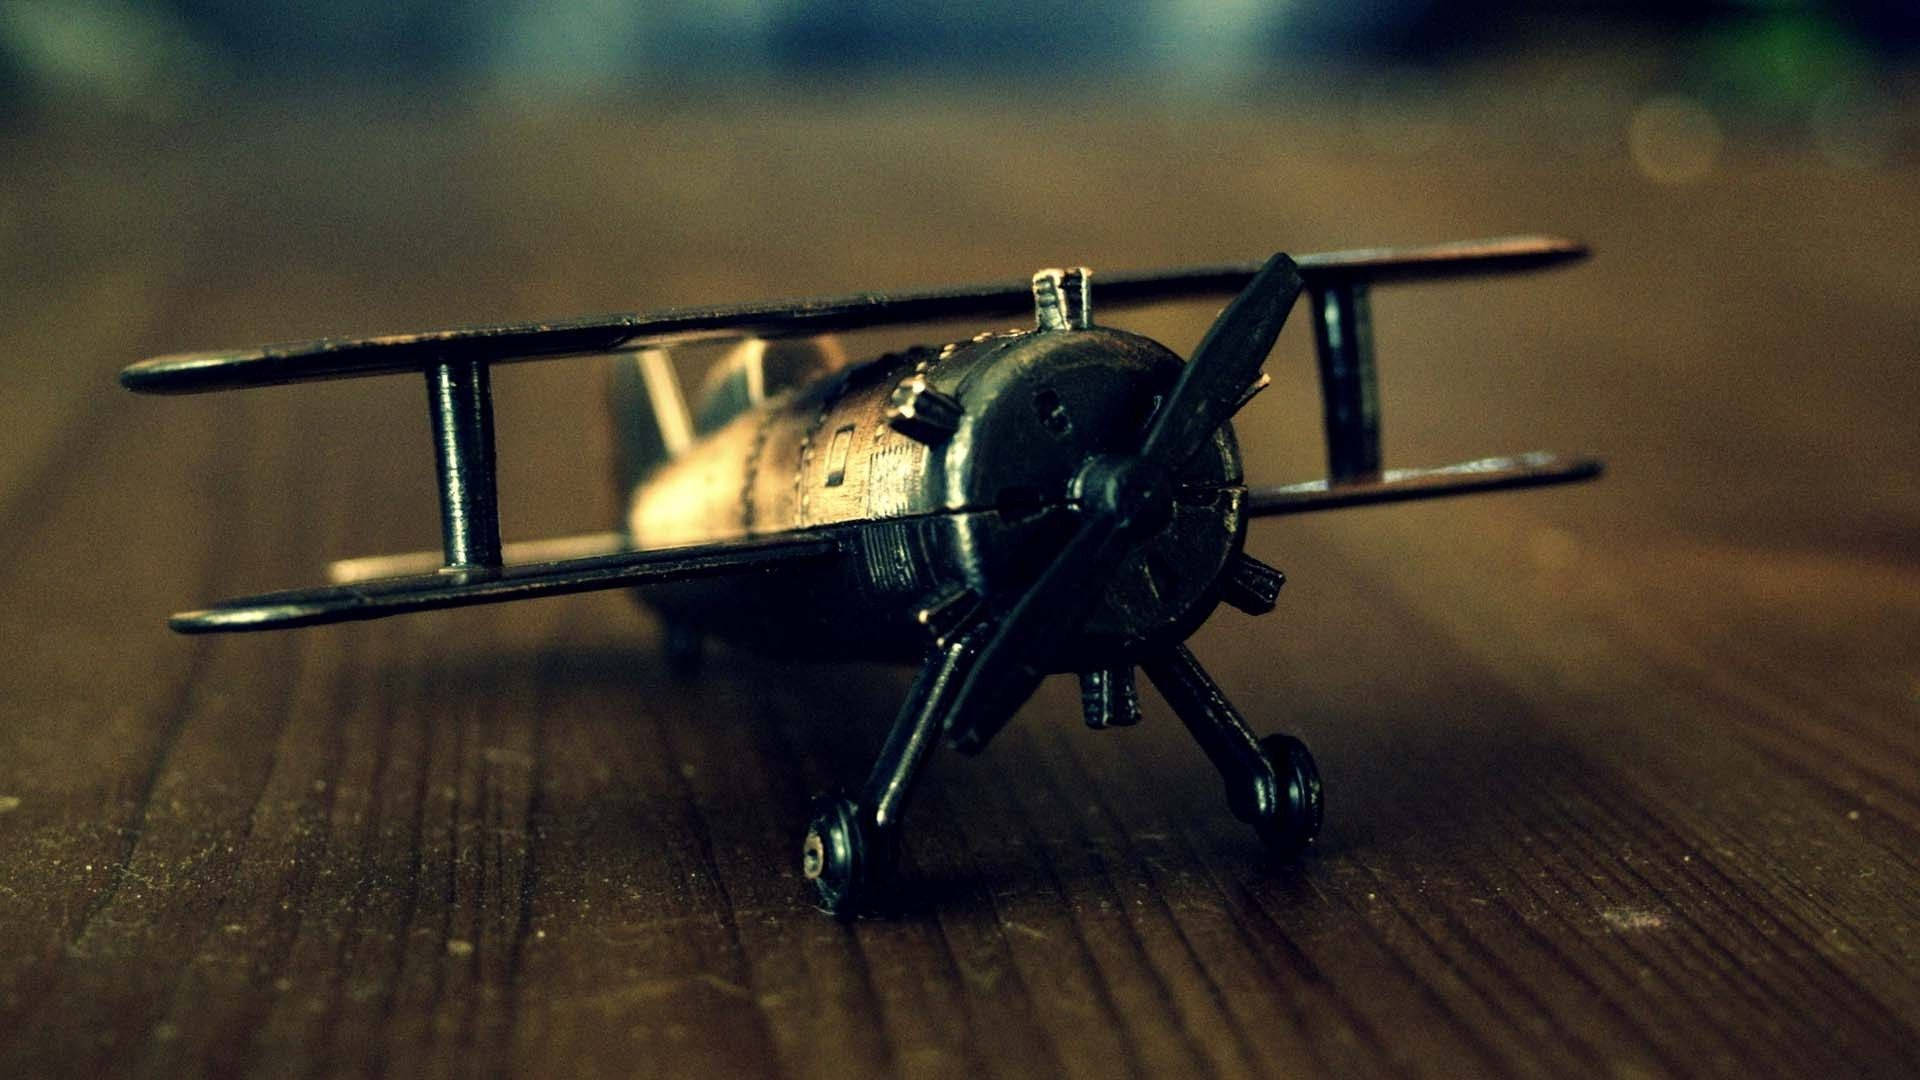 Classic Toy Airplane